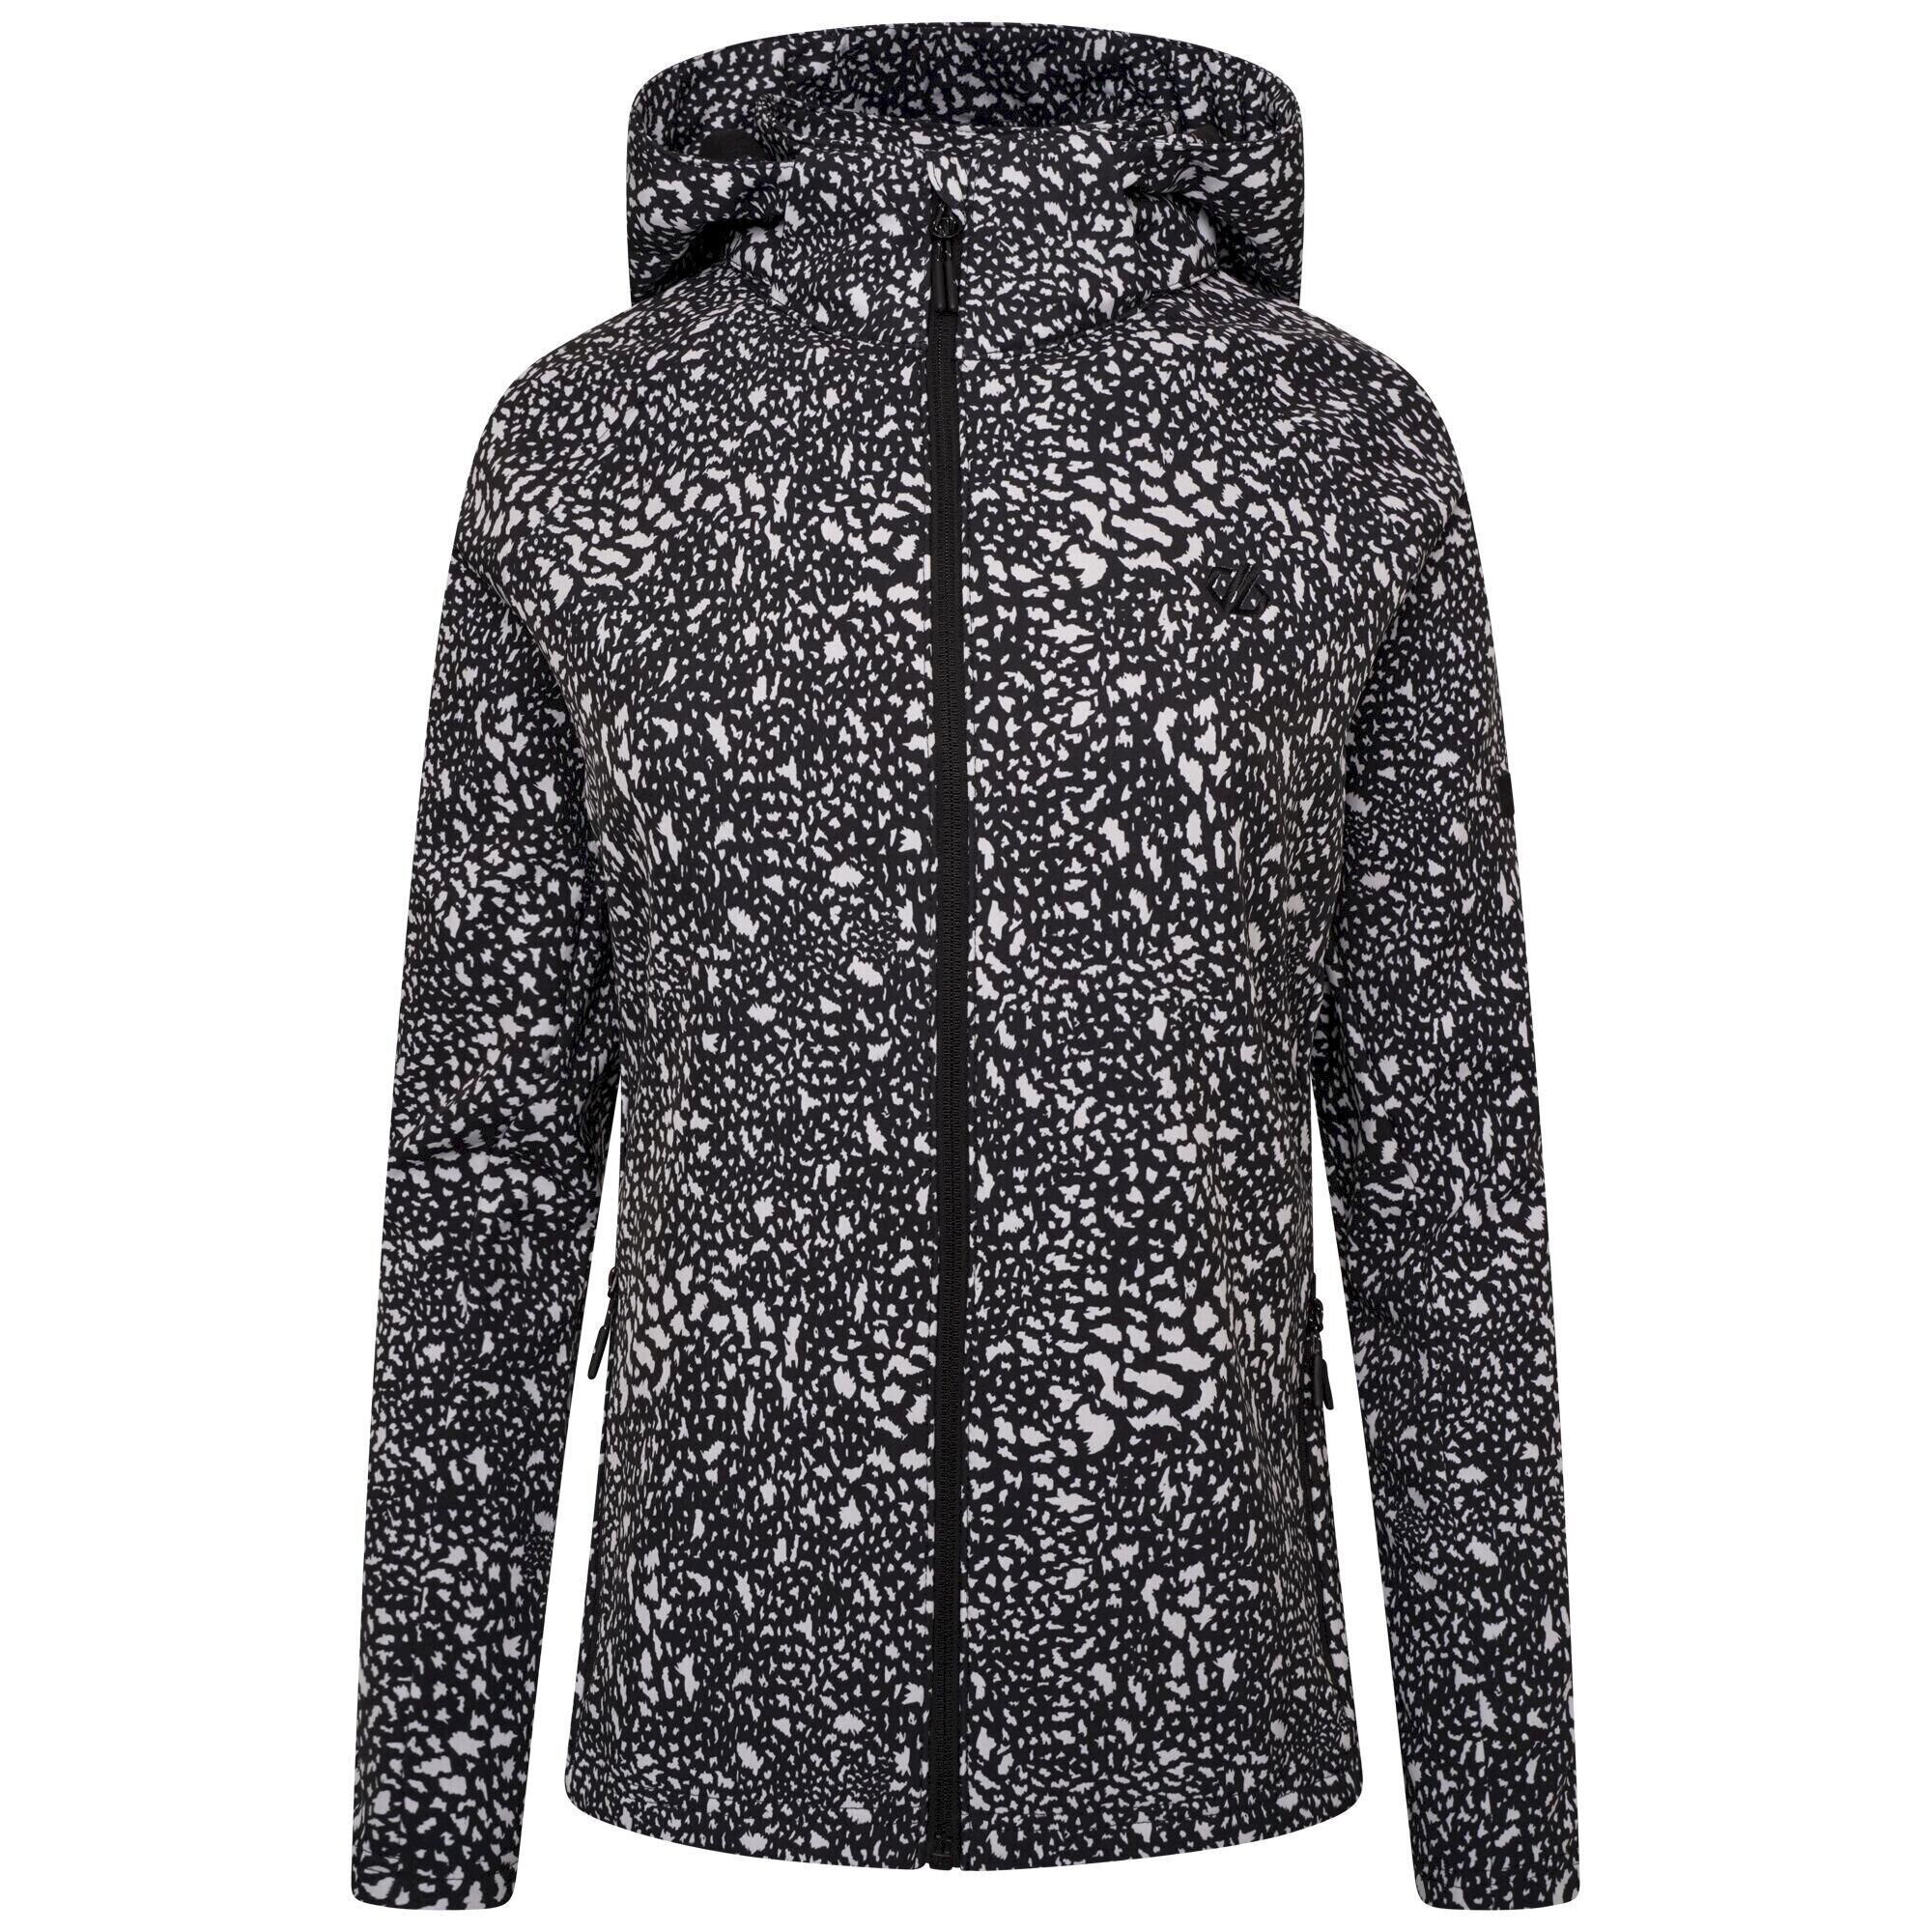 DARE 2B Womens/Ladies Far Out Dotted Soft Shell Jacket (Black/White)